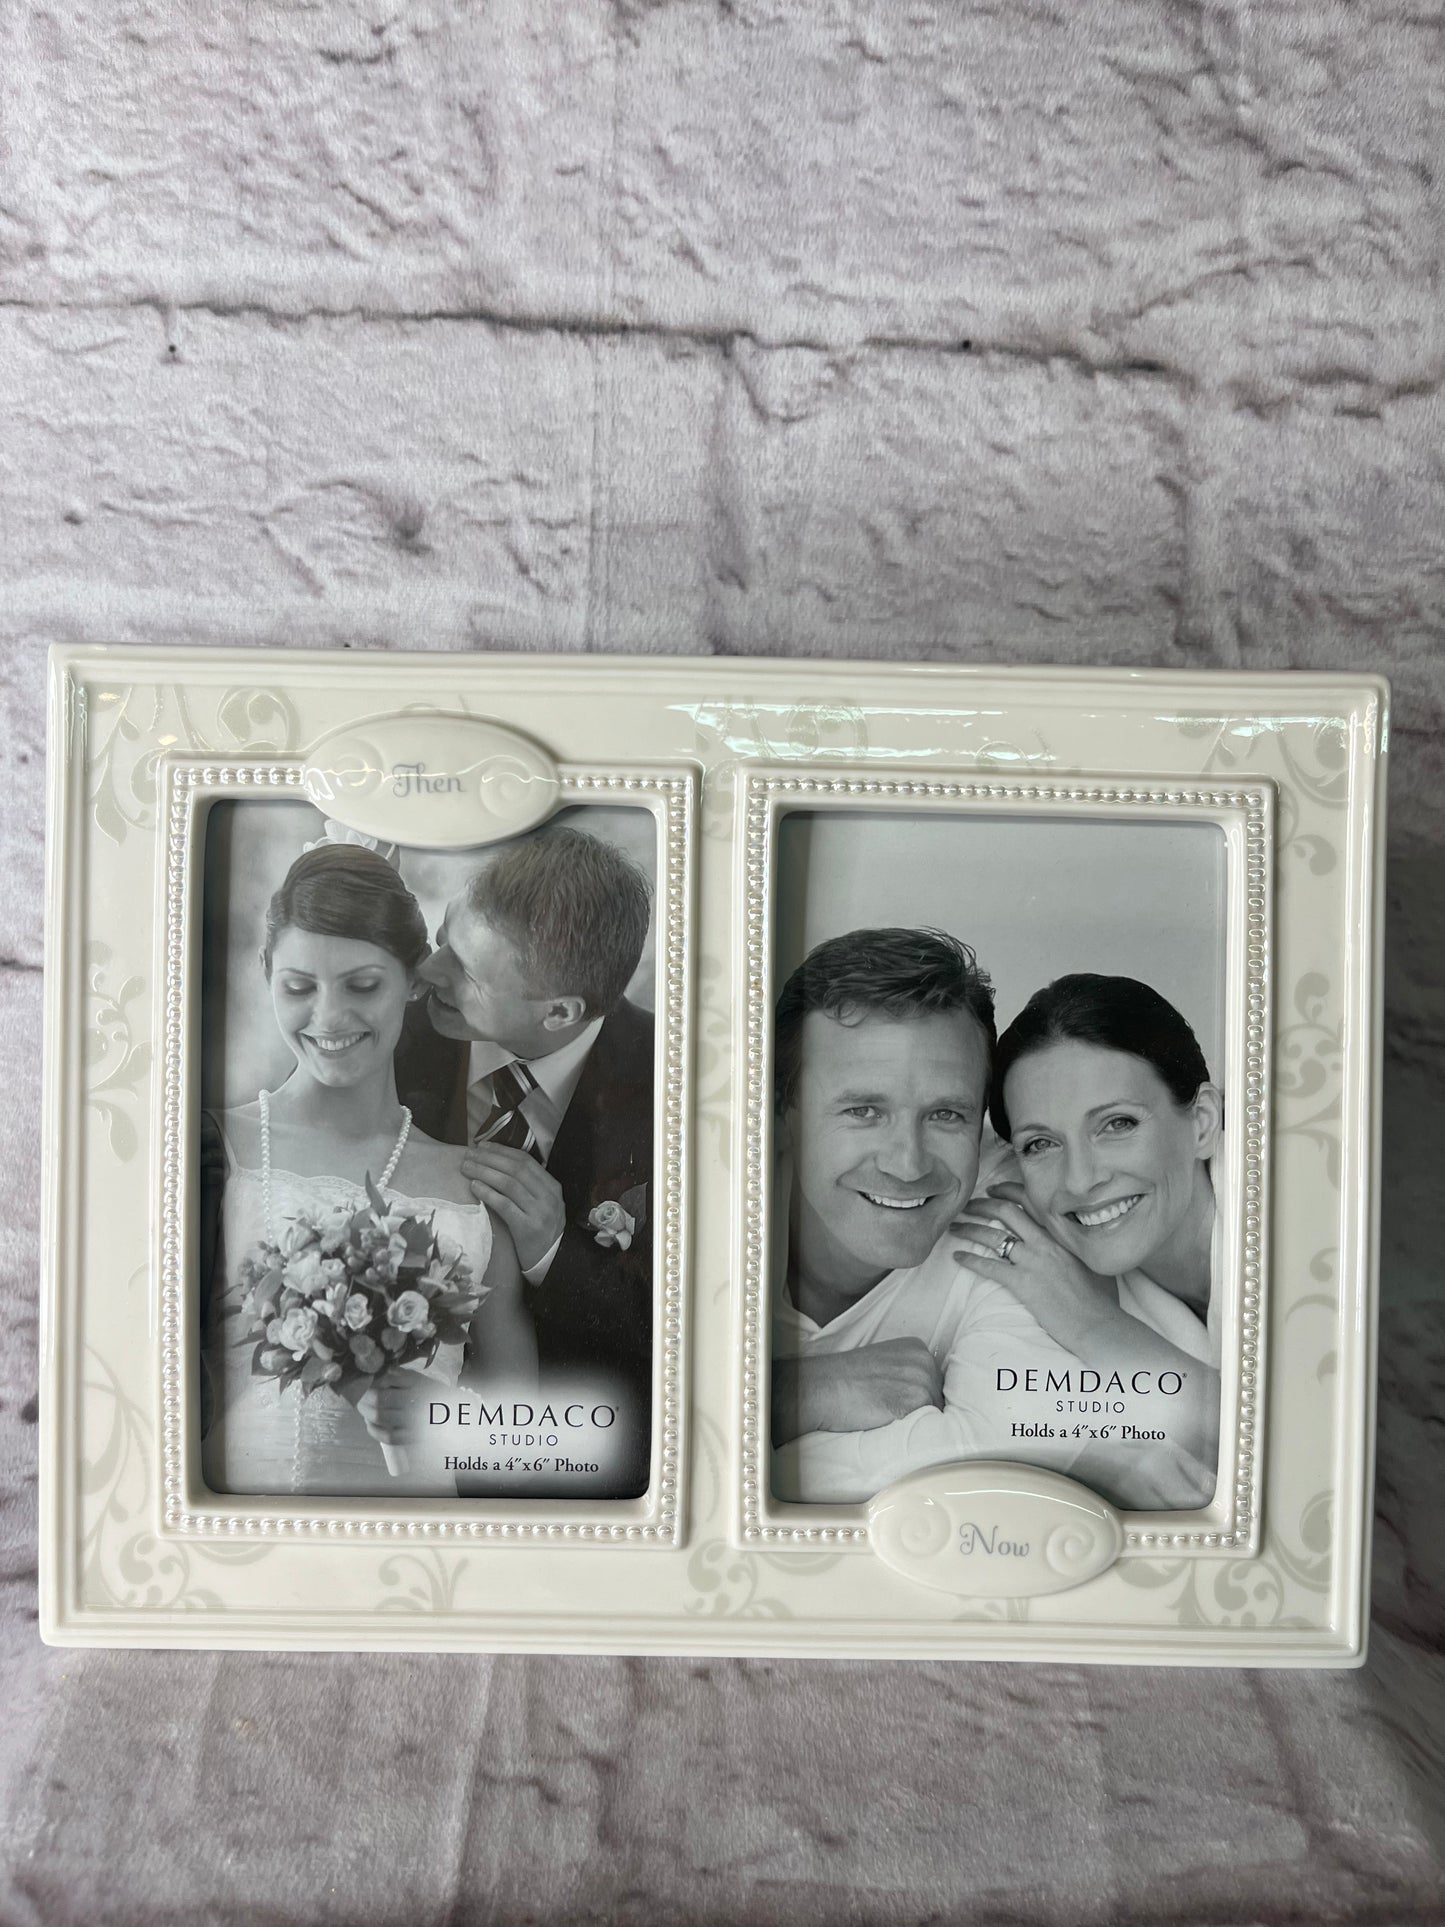 Then & Now Frame